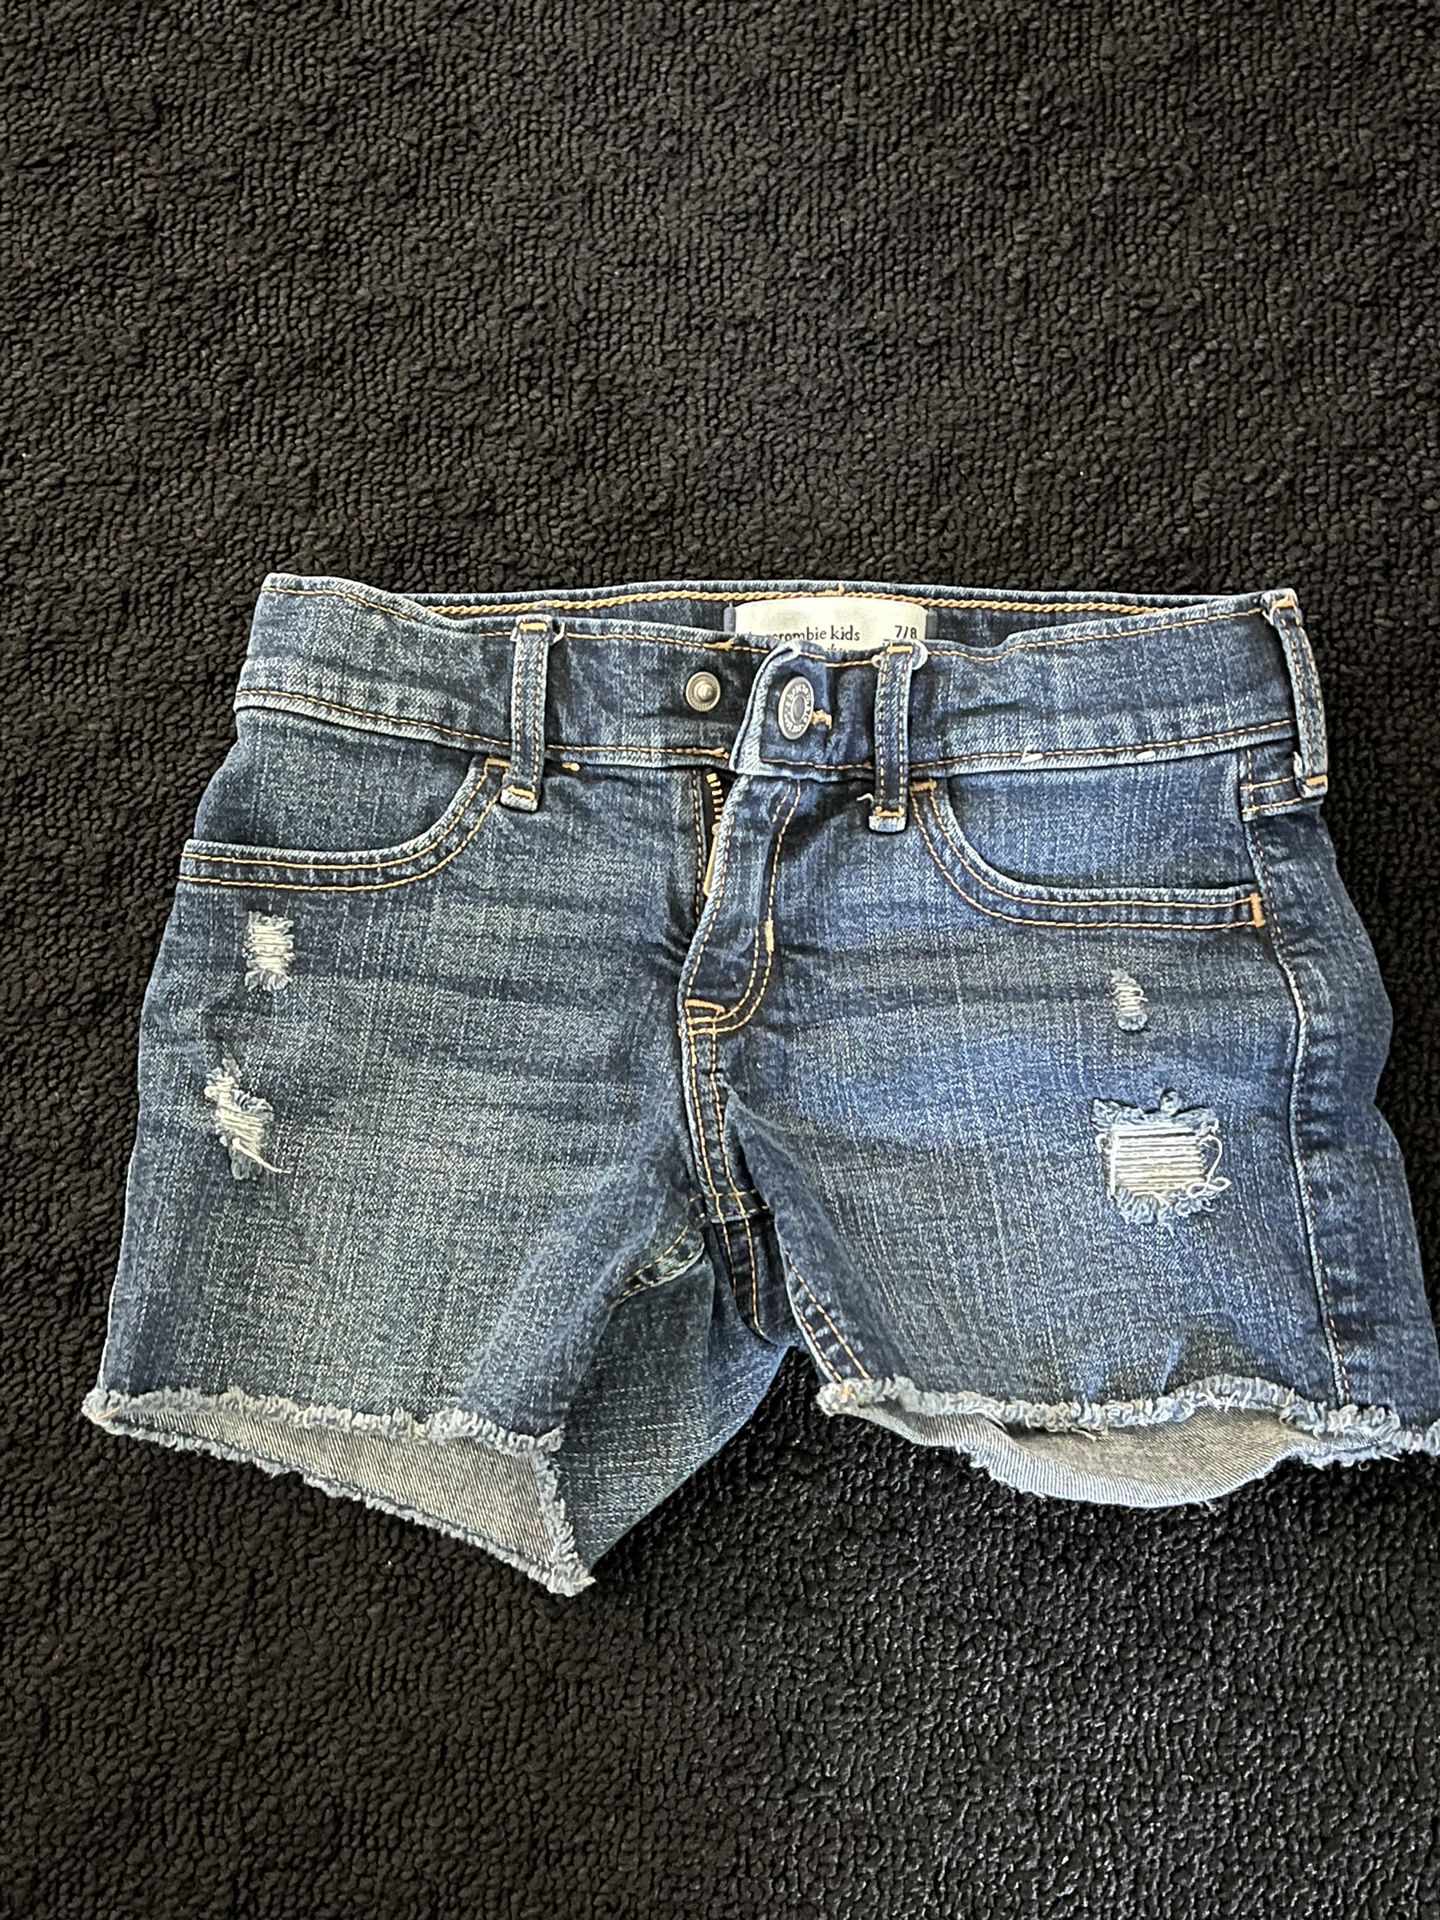 Abercrombie & Fitch Kid’s Shorts Size 7/8